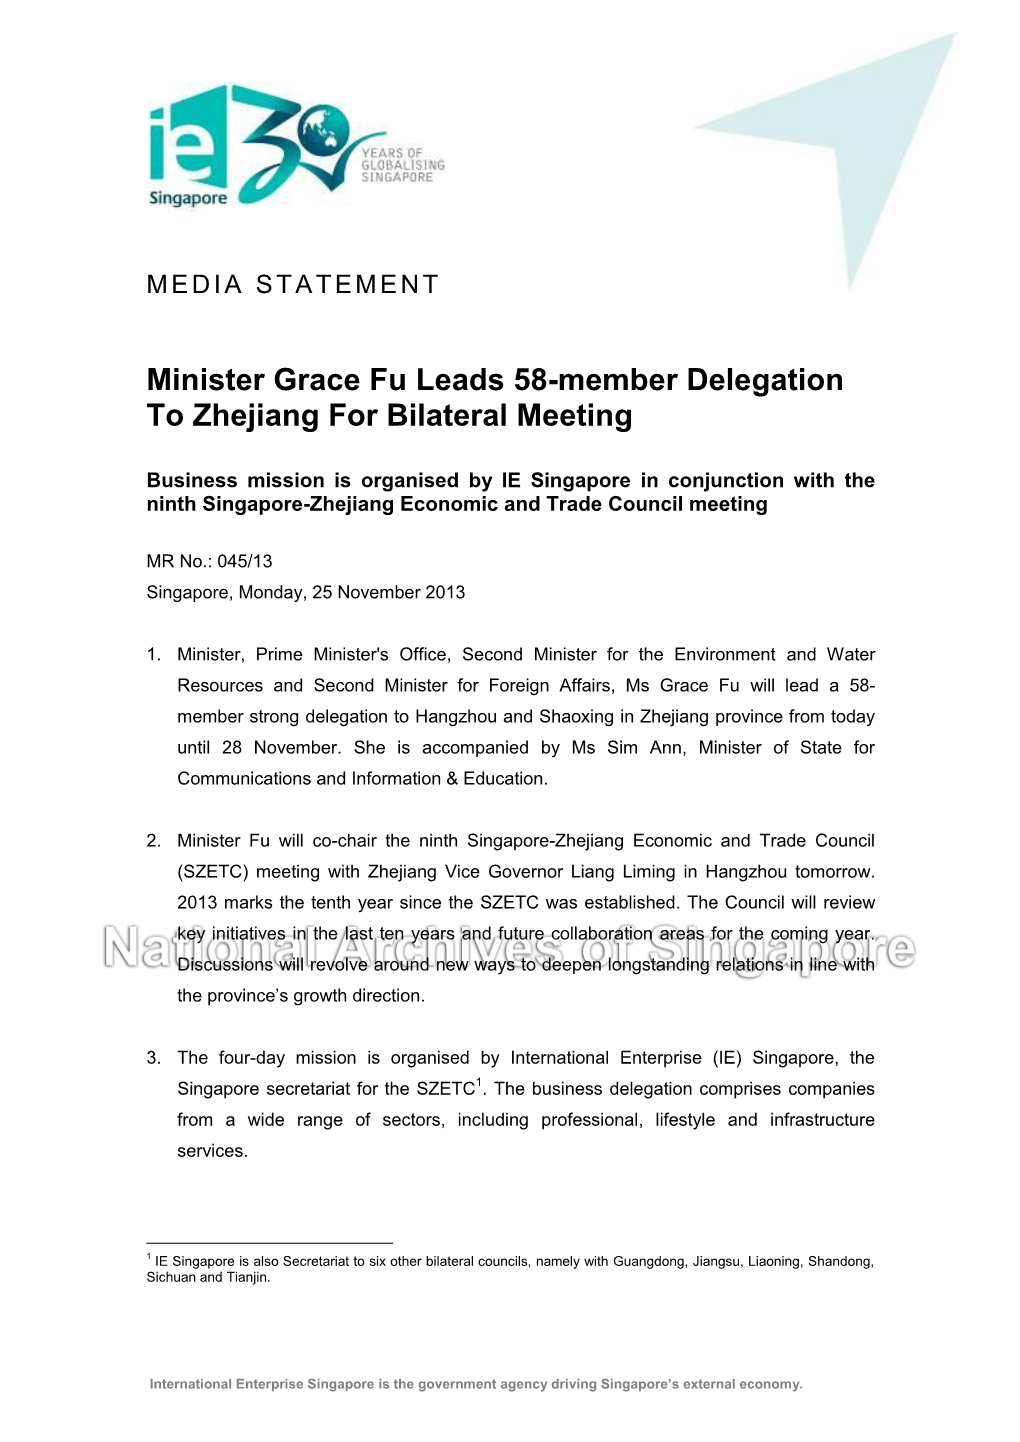 Minister Grace Fu Leads 58-Member Delegation to Zhejiang for Bilateral Meeting